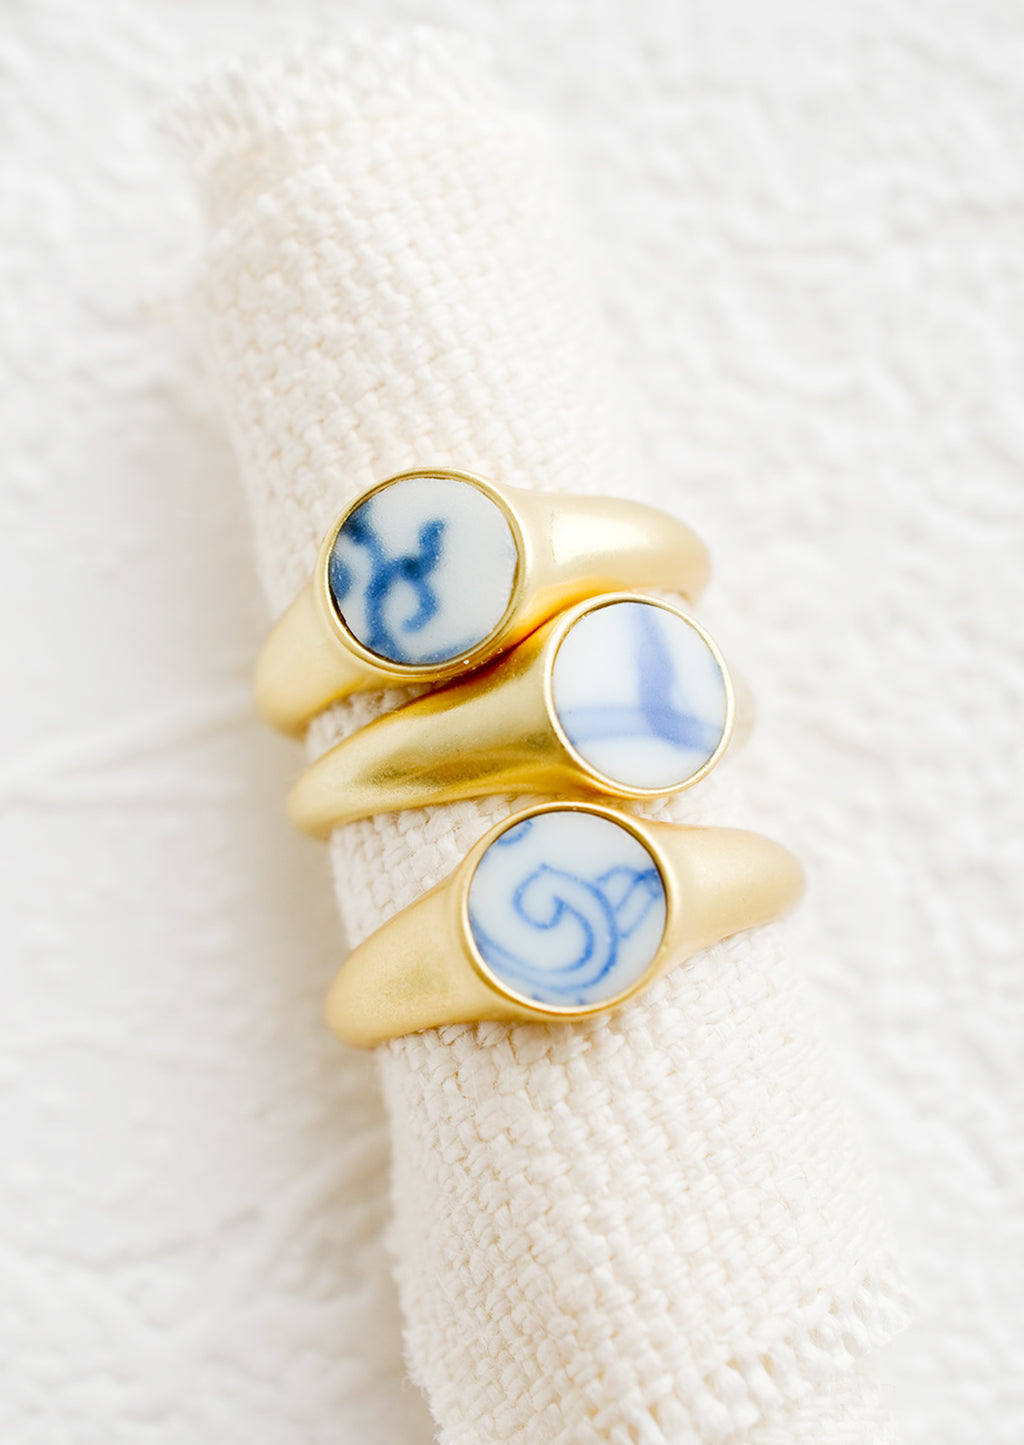 3: Gold signet rings with blue and white pottery signet.